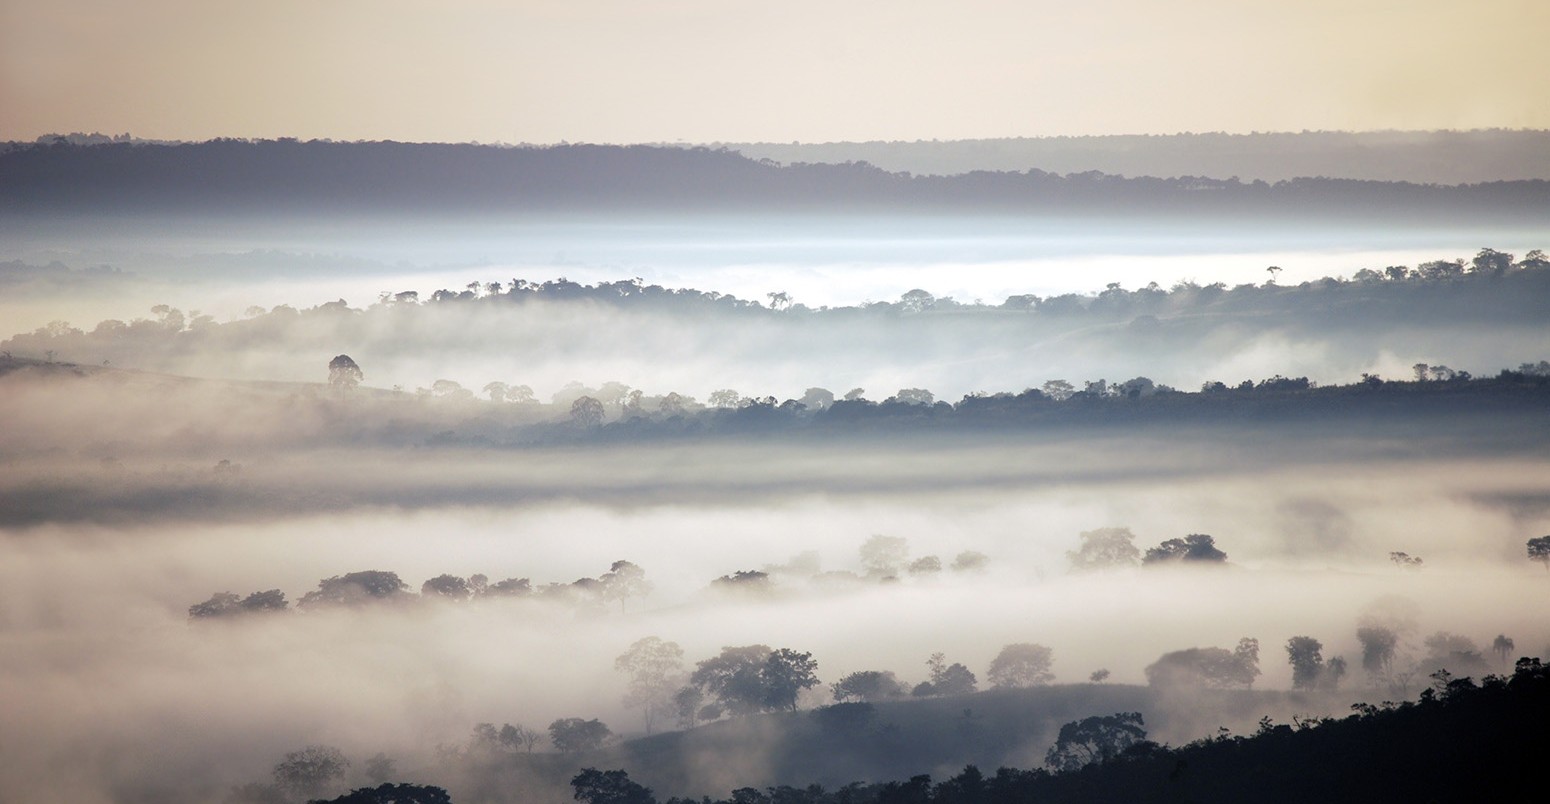 Early morning mist over the Amazon rainforest.